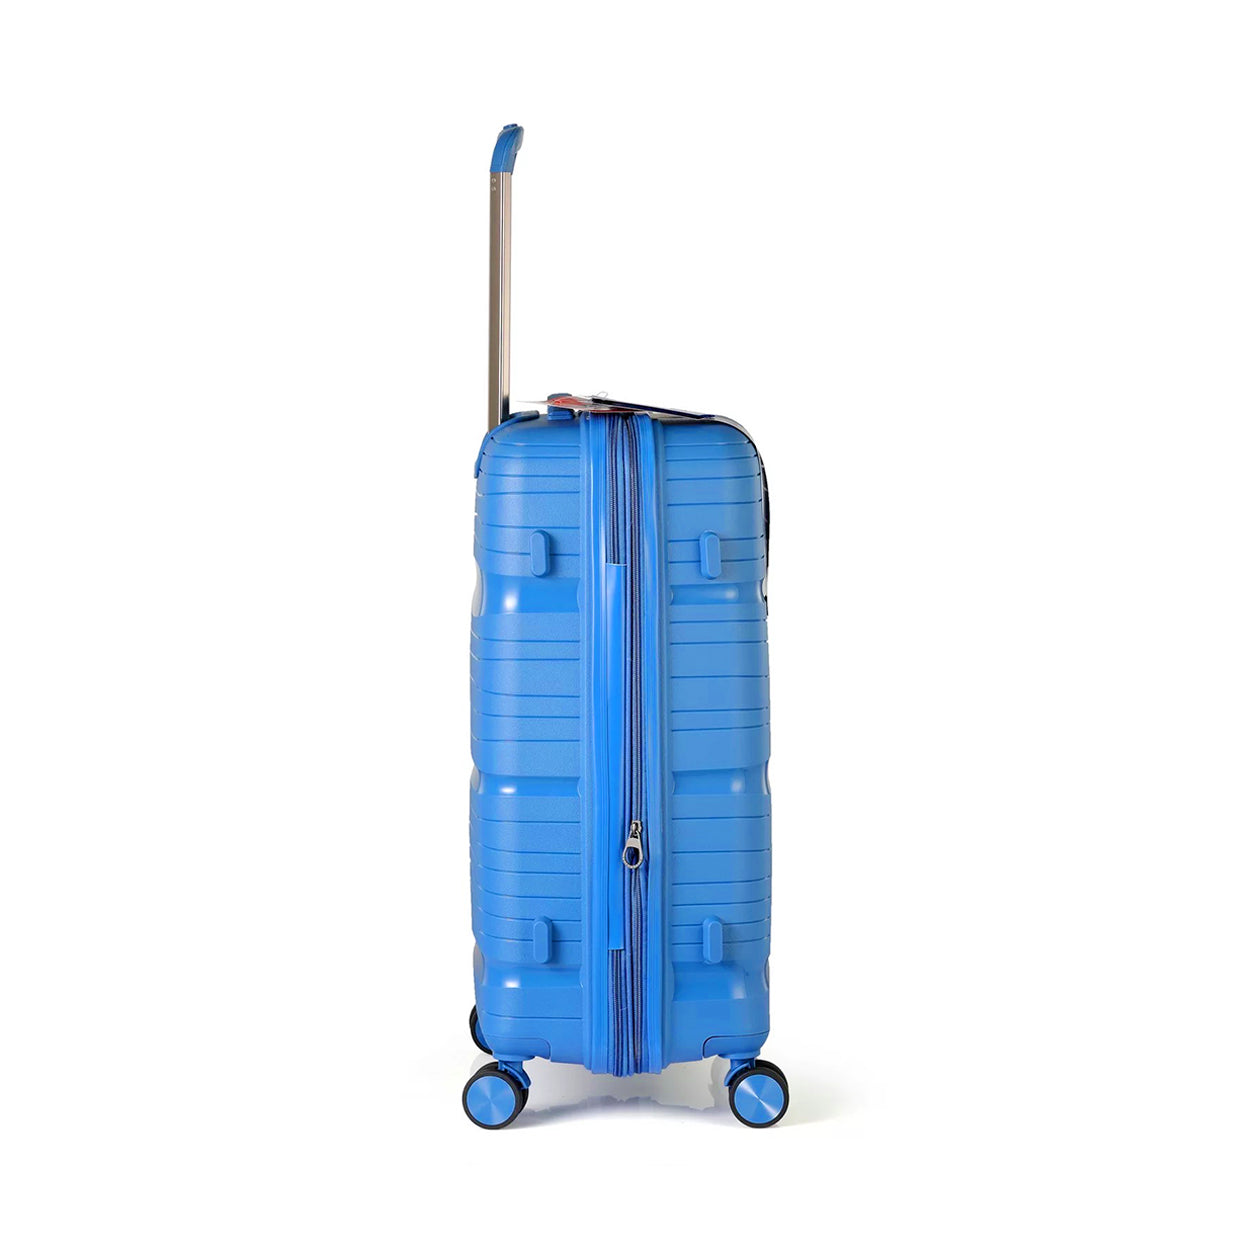 24" Sky Blue Colour Royal PP Luggage Lightweight Hard Case Trolley Bag with Double Spinner Wheel